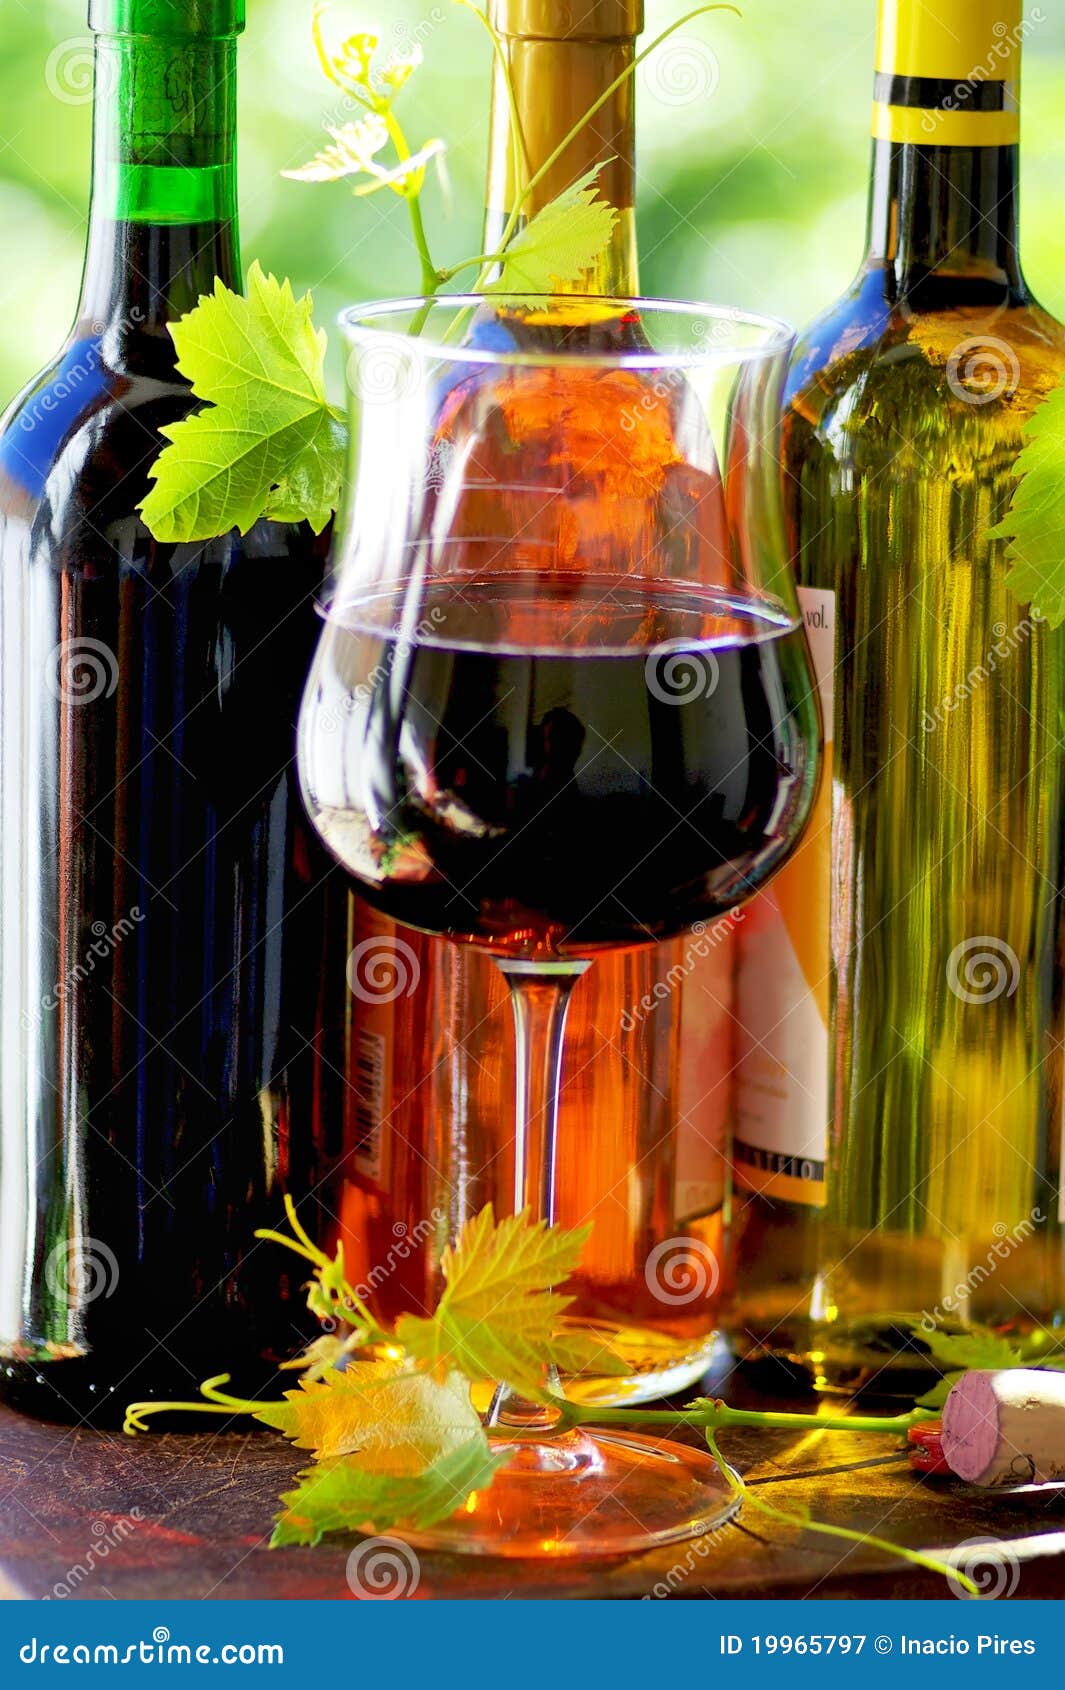 Red Wine Glass and Grapevine Leaves Stock Image - Image of berry ...